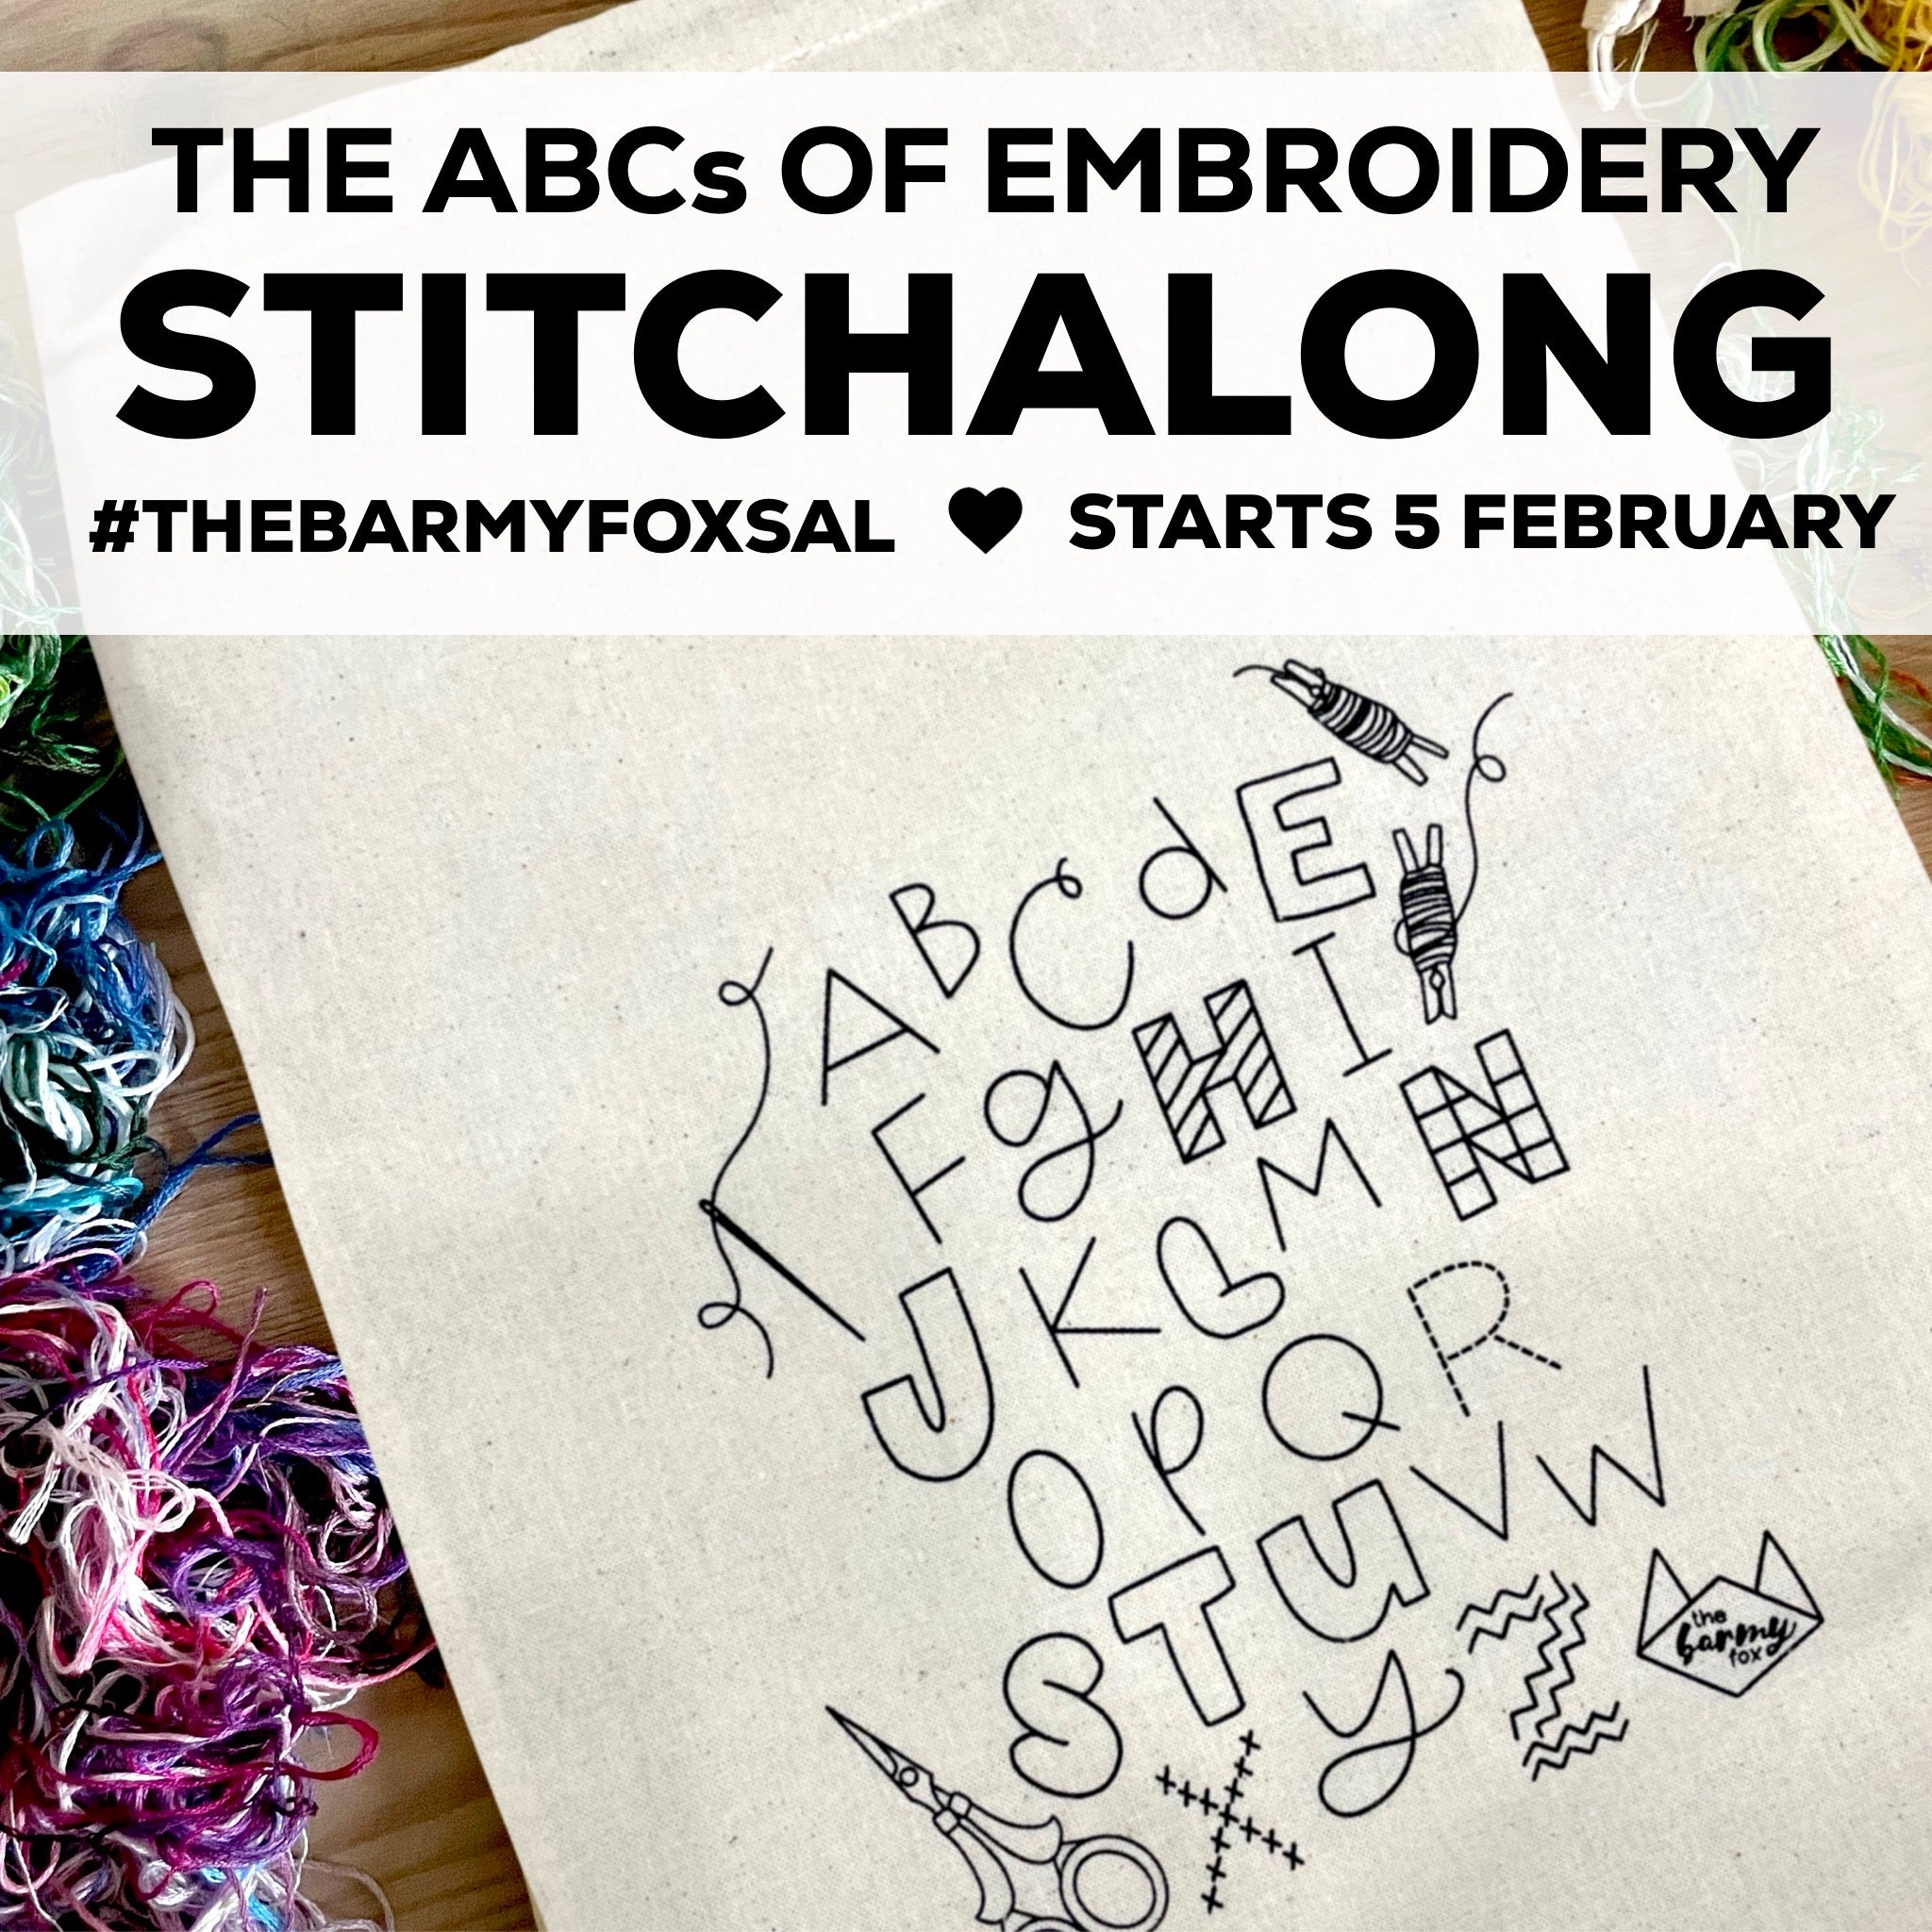 The ABCs of Embroidery Stitchalong, Live Video Tutorials on Instagram